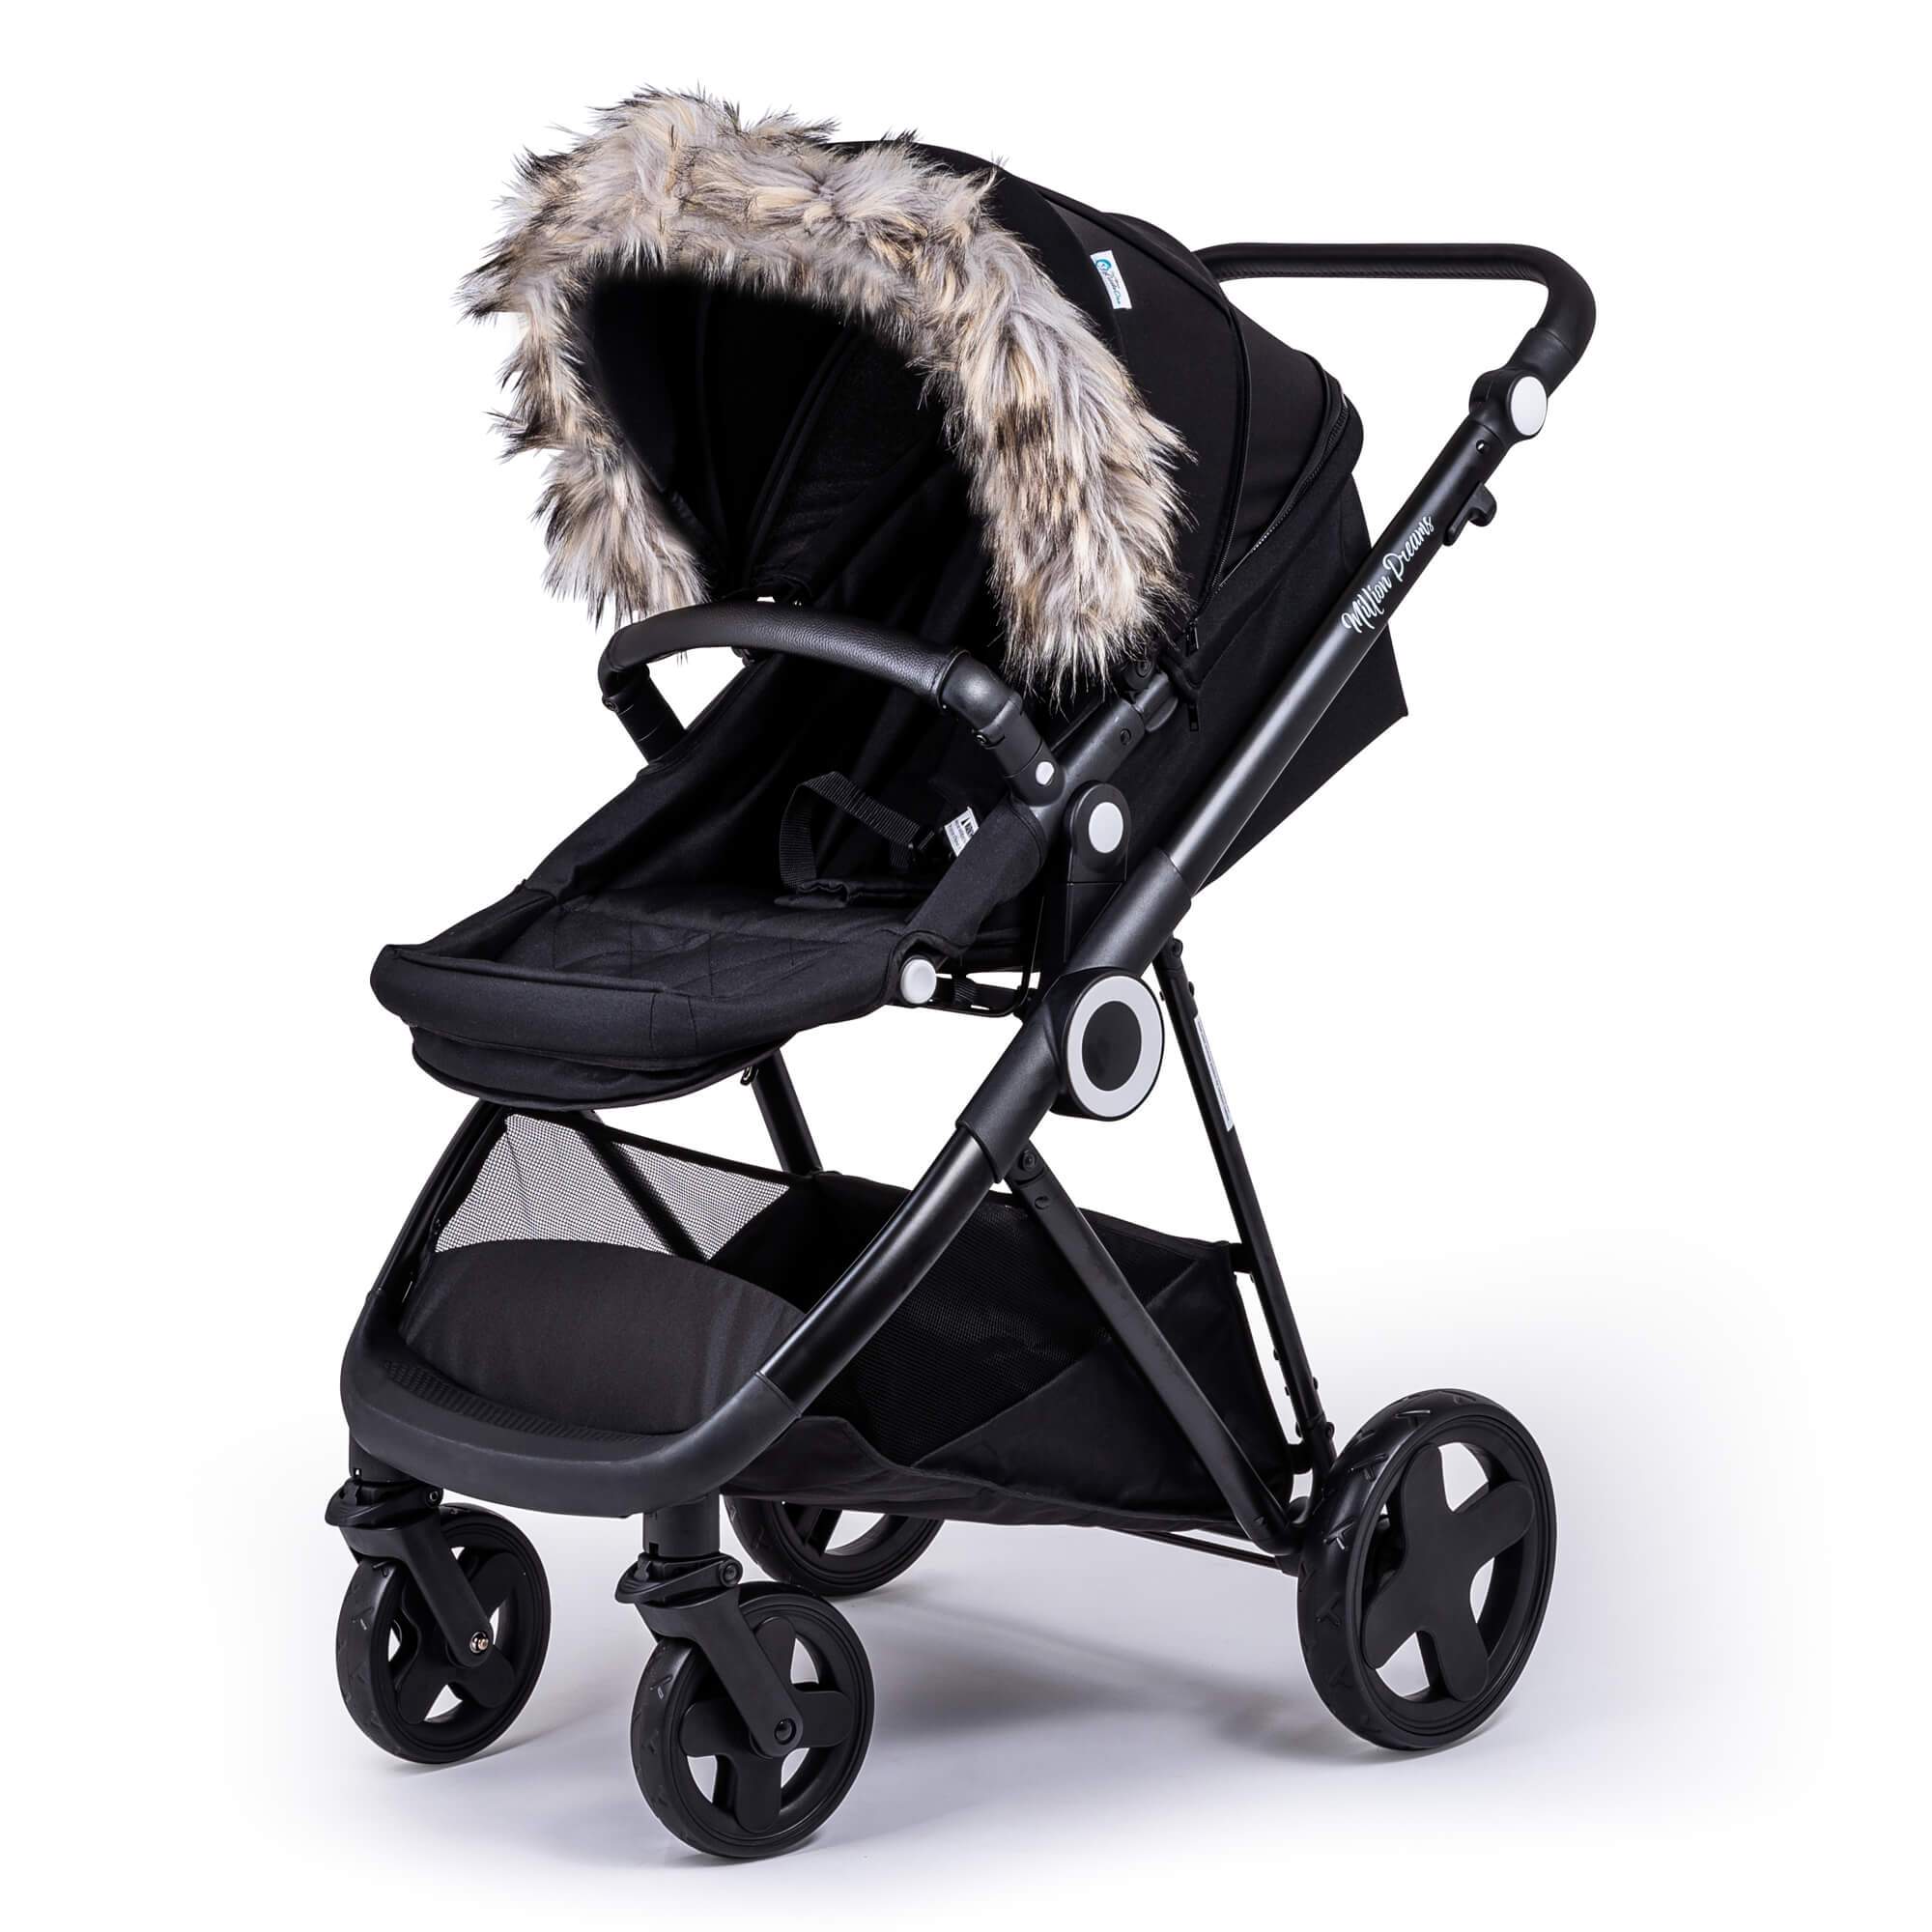 Pram Fur Hood Trim Attachment for Pushchair - Light Grey / Fits All Models | For Your Little One